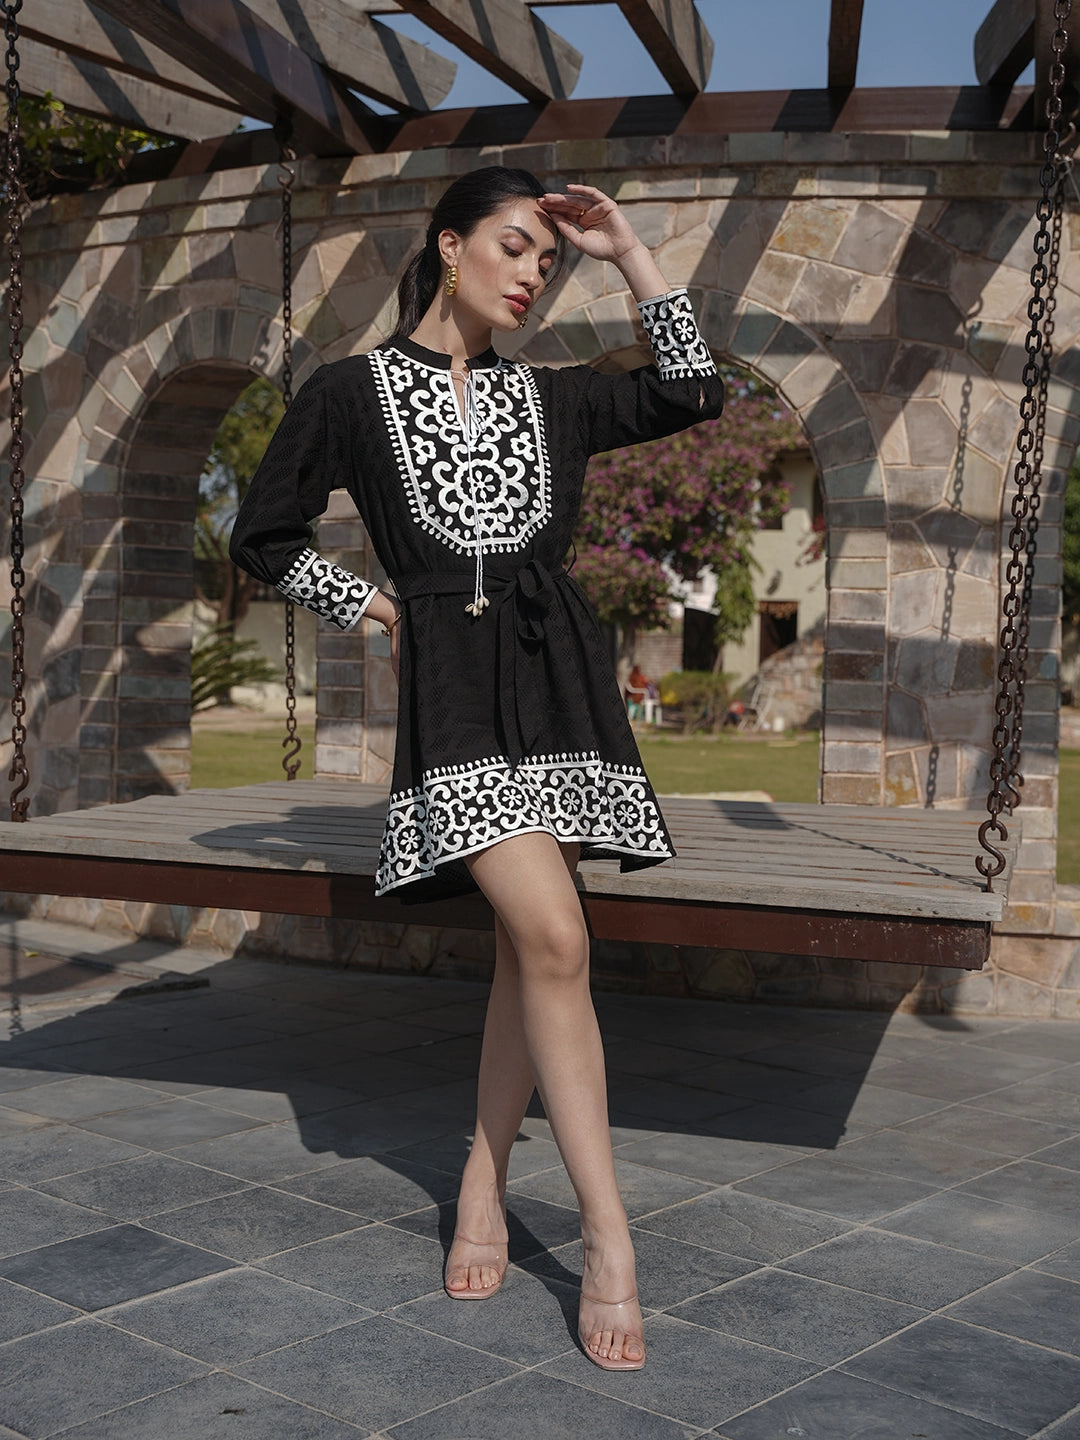 Copy of Monochrome Muse: Black Dress with White Embroidery